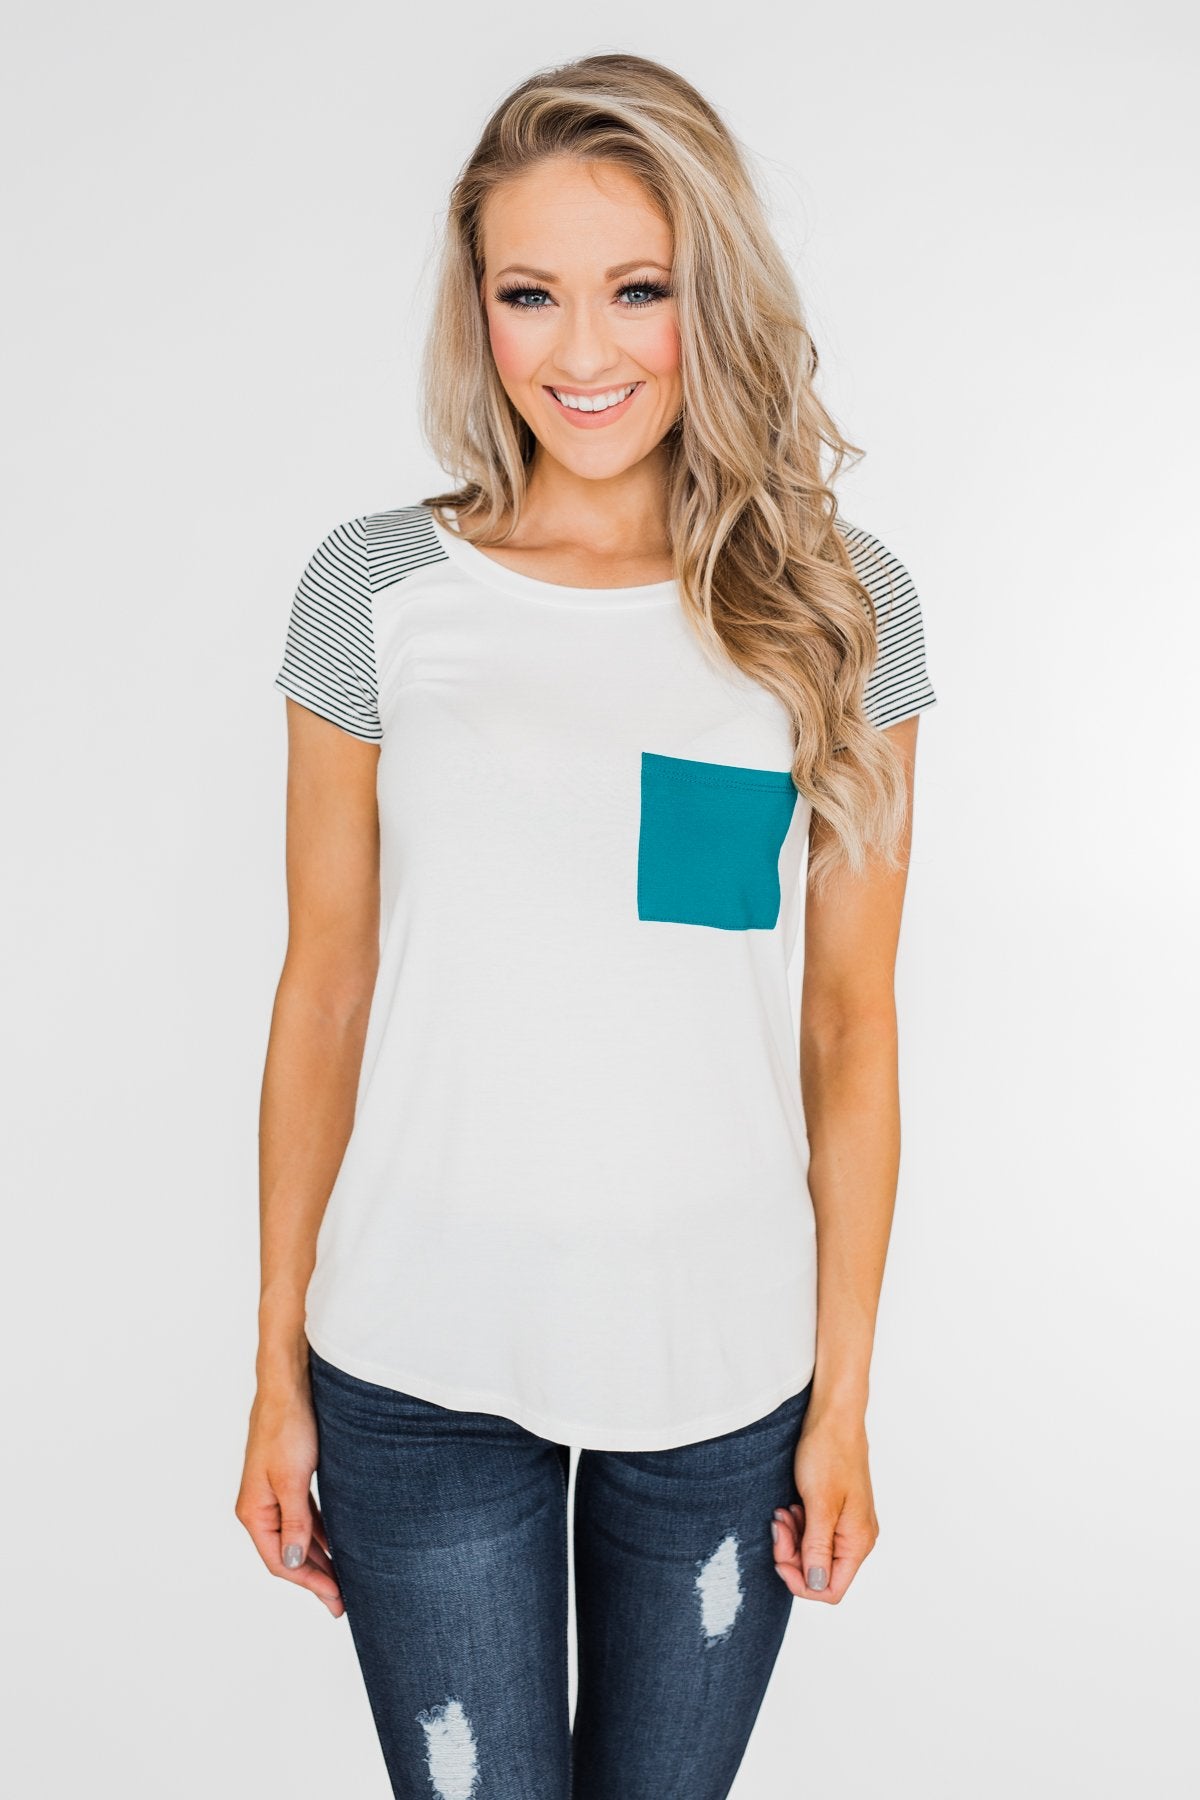 Take Me There Striped Sleeve Pocket Top- Teal